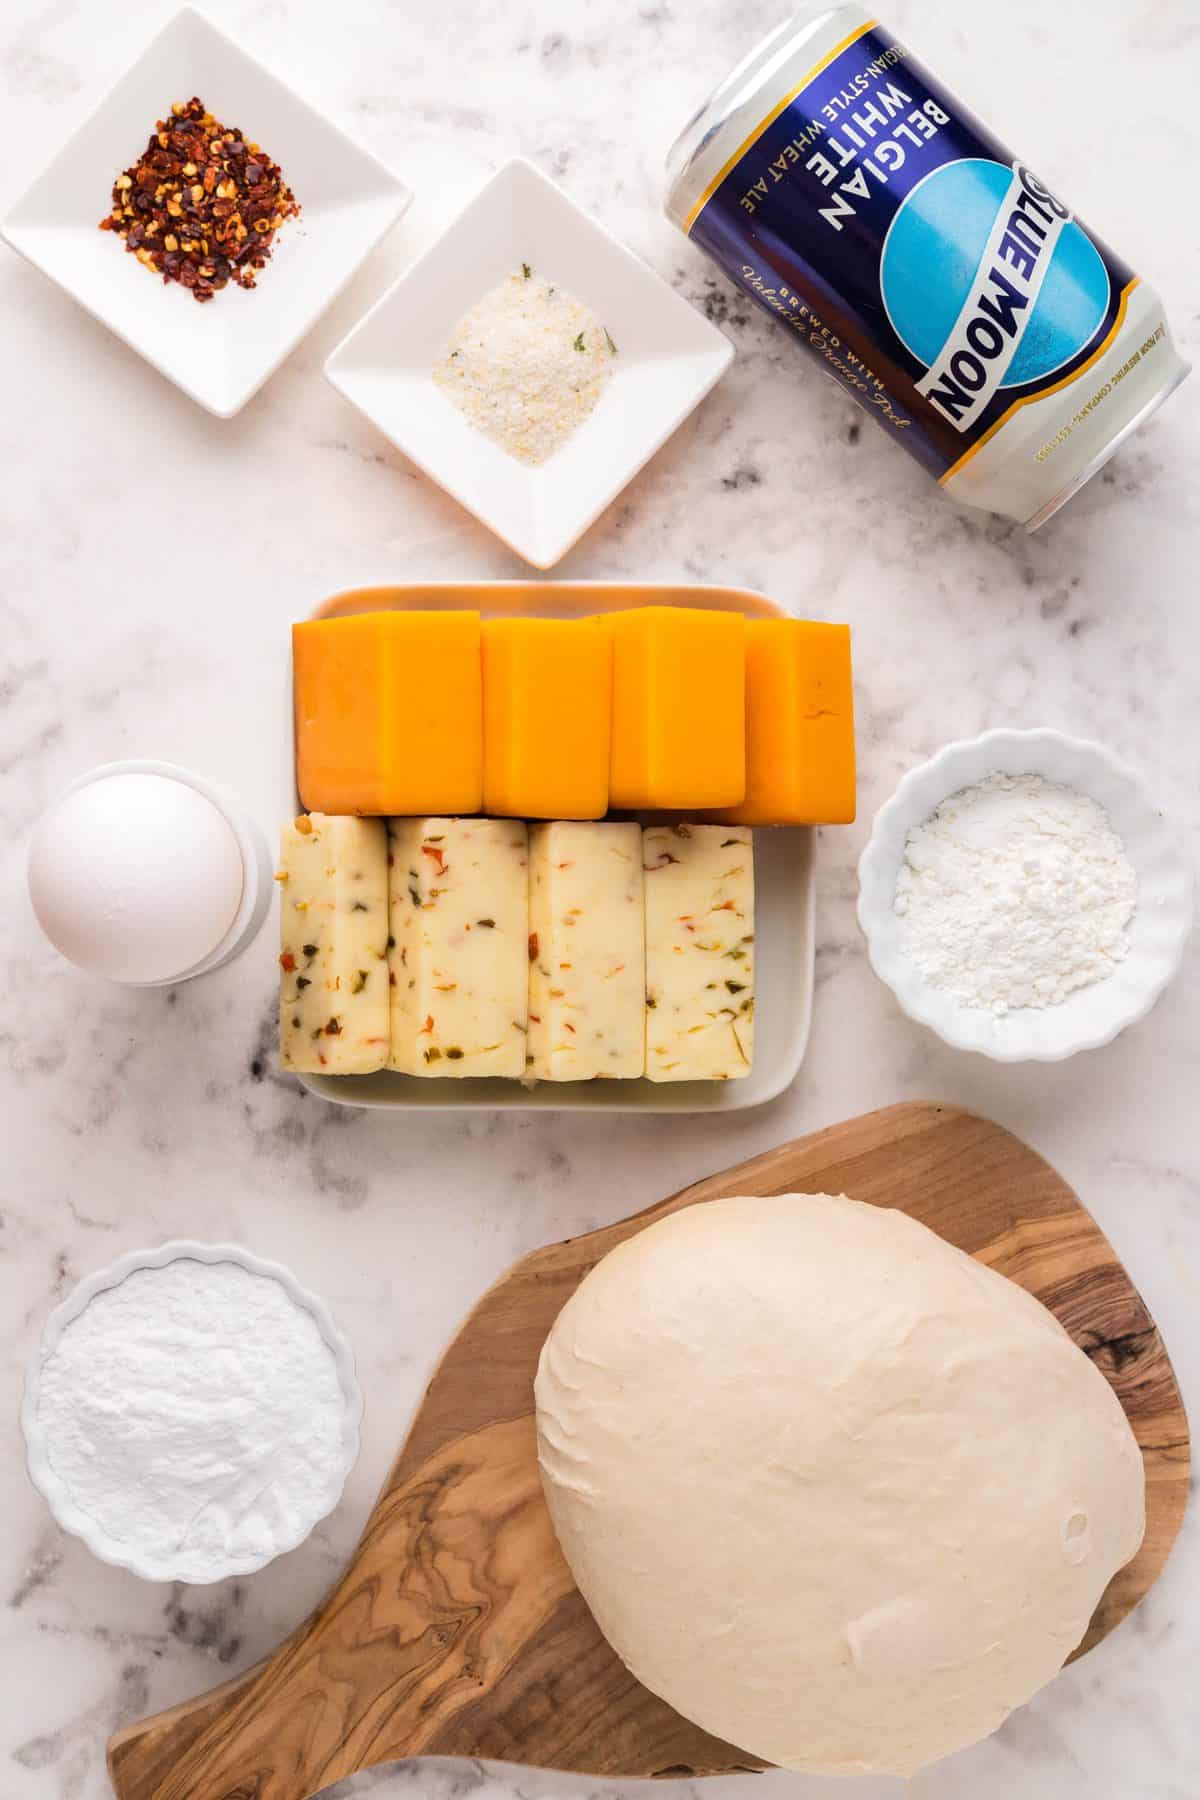 ingredients laid out to make beer cheese stuffed pretzel rolls